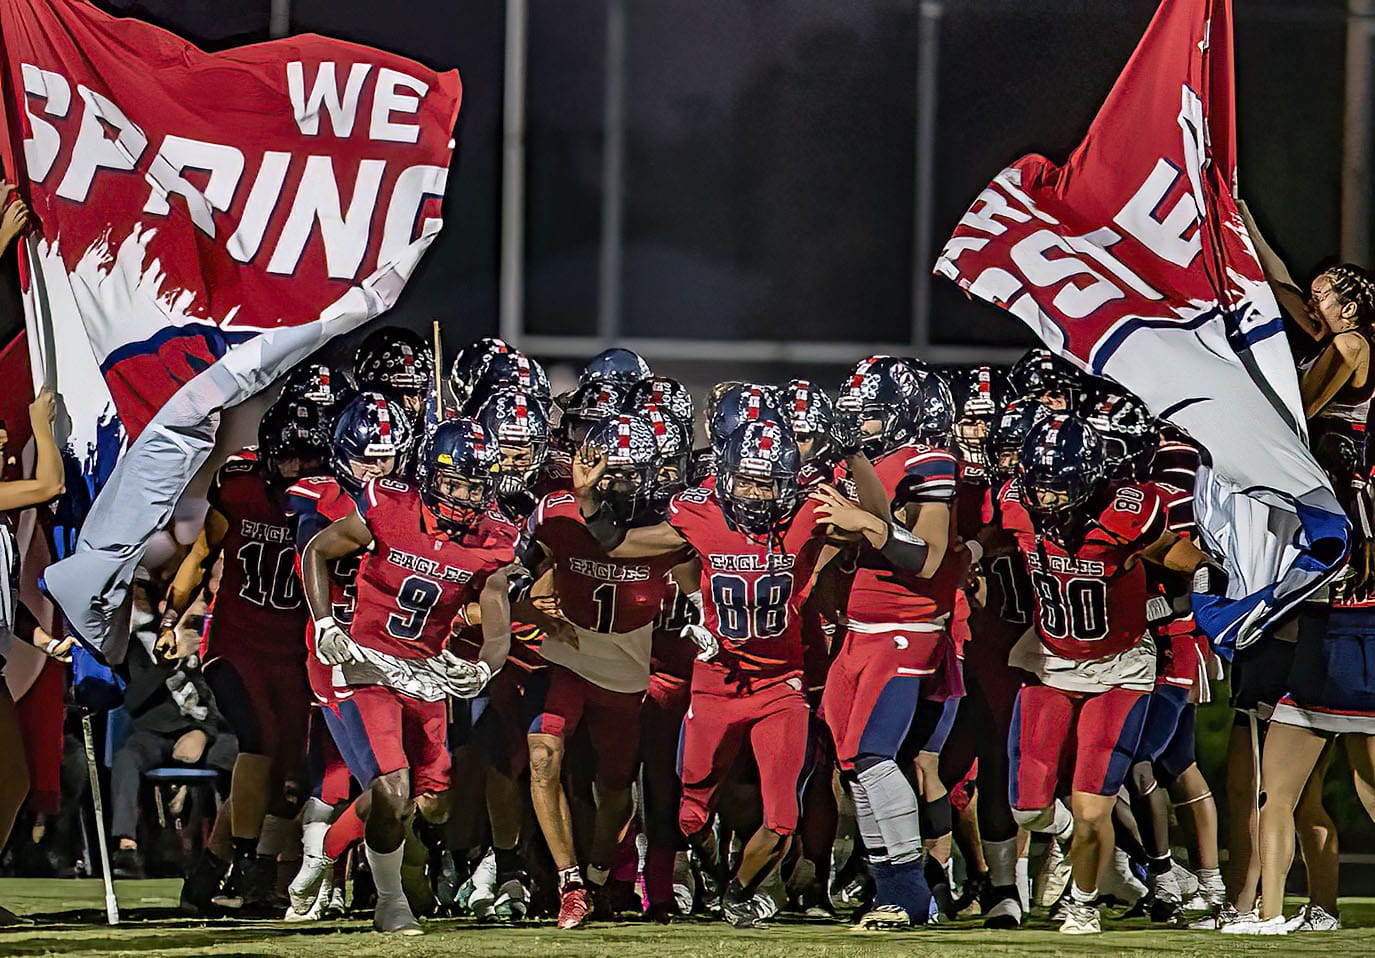 Springstead breaks the banner before the Homecoming game defending their perfect season record taking on Land O’ Lakes. Players include 9, Taylor Fussell, 88, Caidell Gilbert, and, 80, Michael Rizzutto. Photo by JOE DiCRISTOFALO